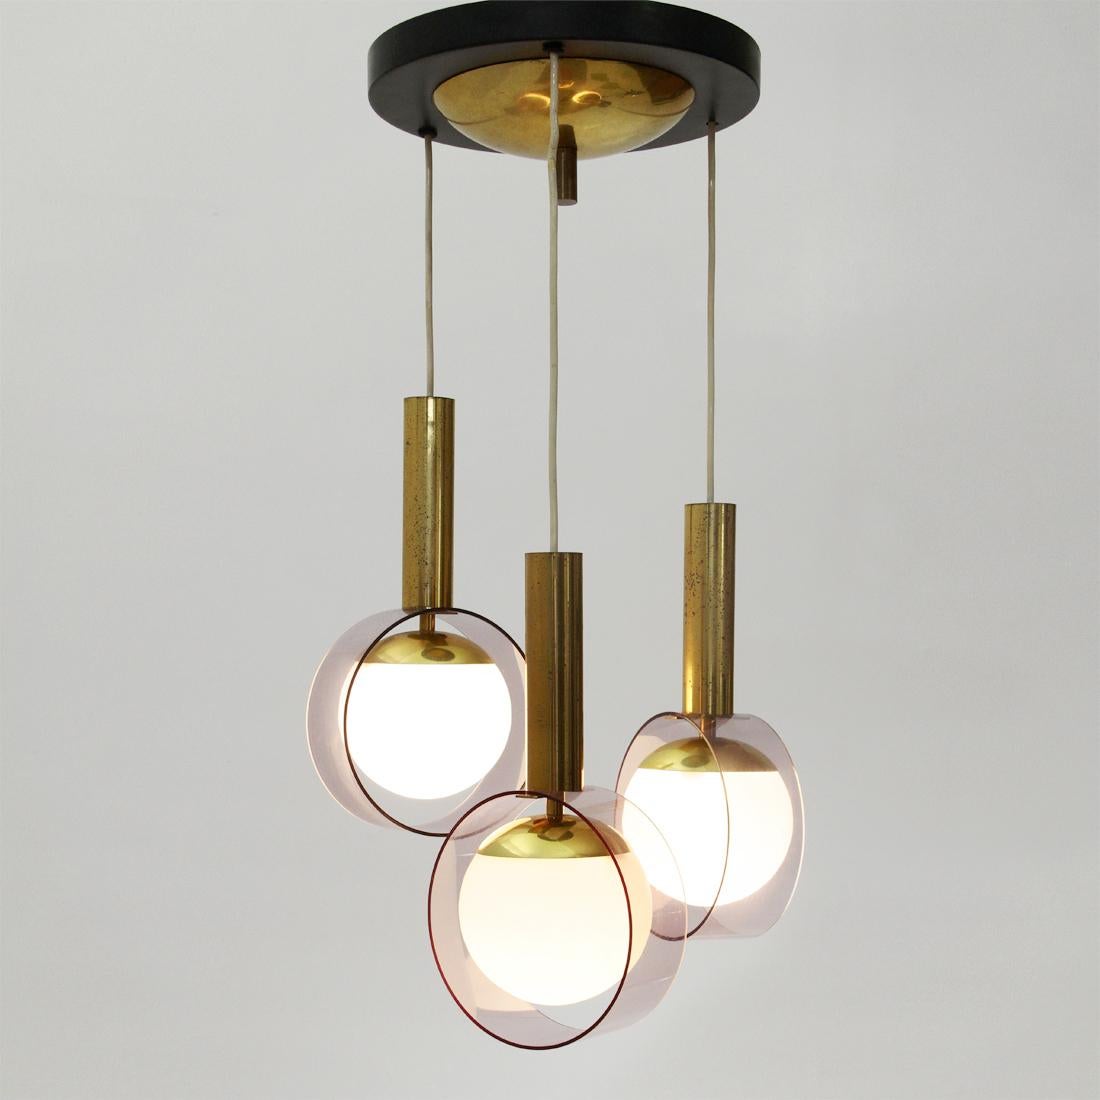 Chandelier produced by Stilux in the 1960s.
Rosette in black painted metal and brass.
Three pendants at different heights with brass frame and spherical diffusers in opal glass and pink perspex.
Good general conditions, some signs due to normal